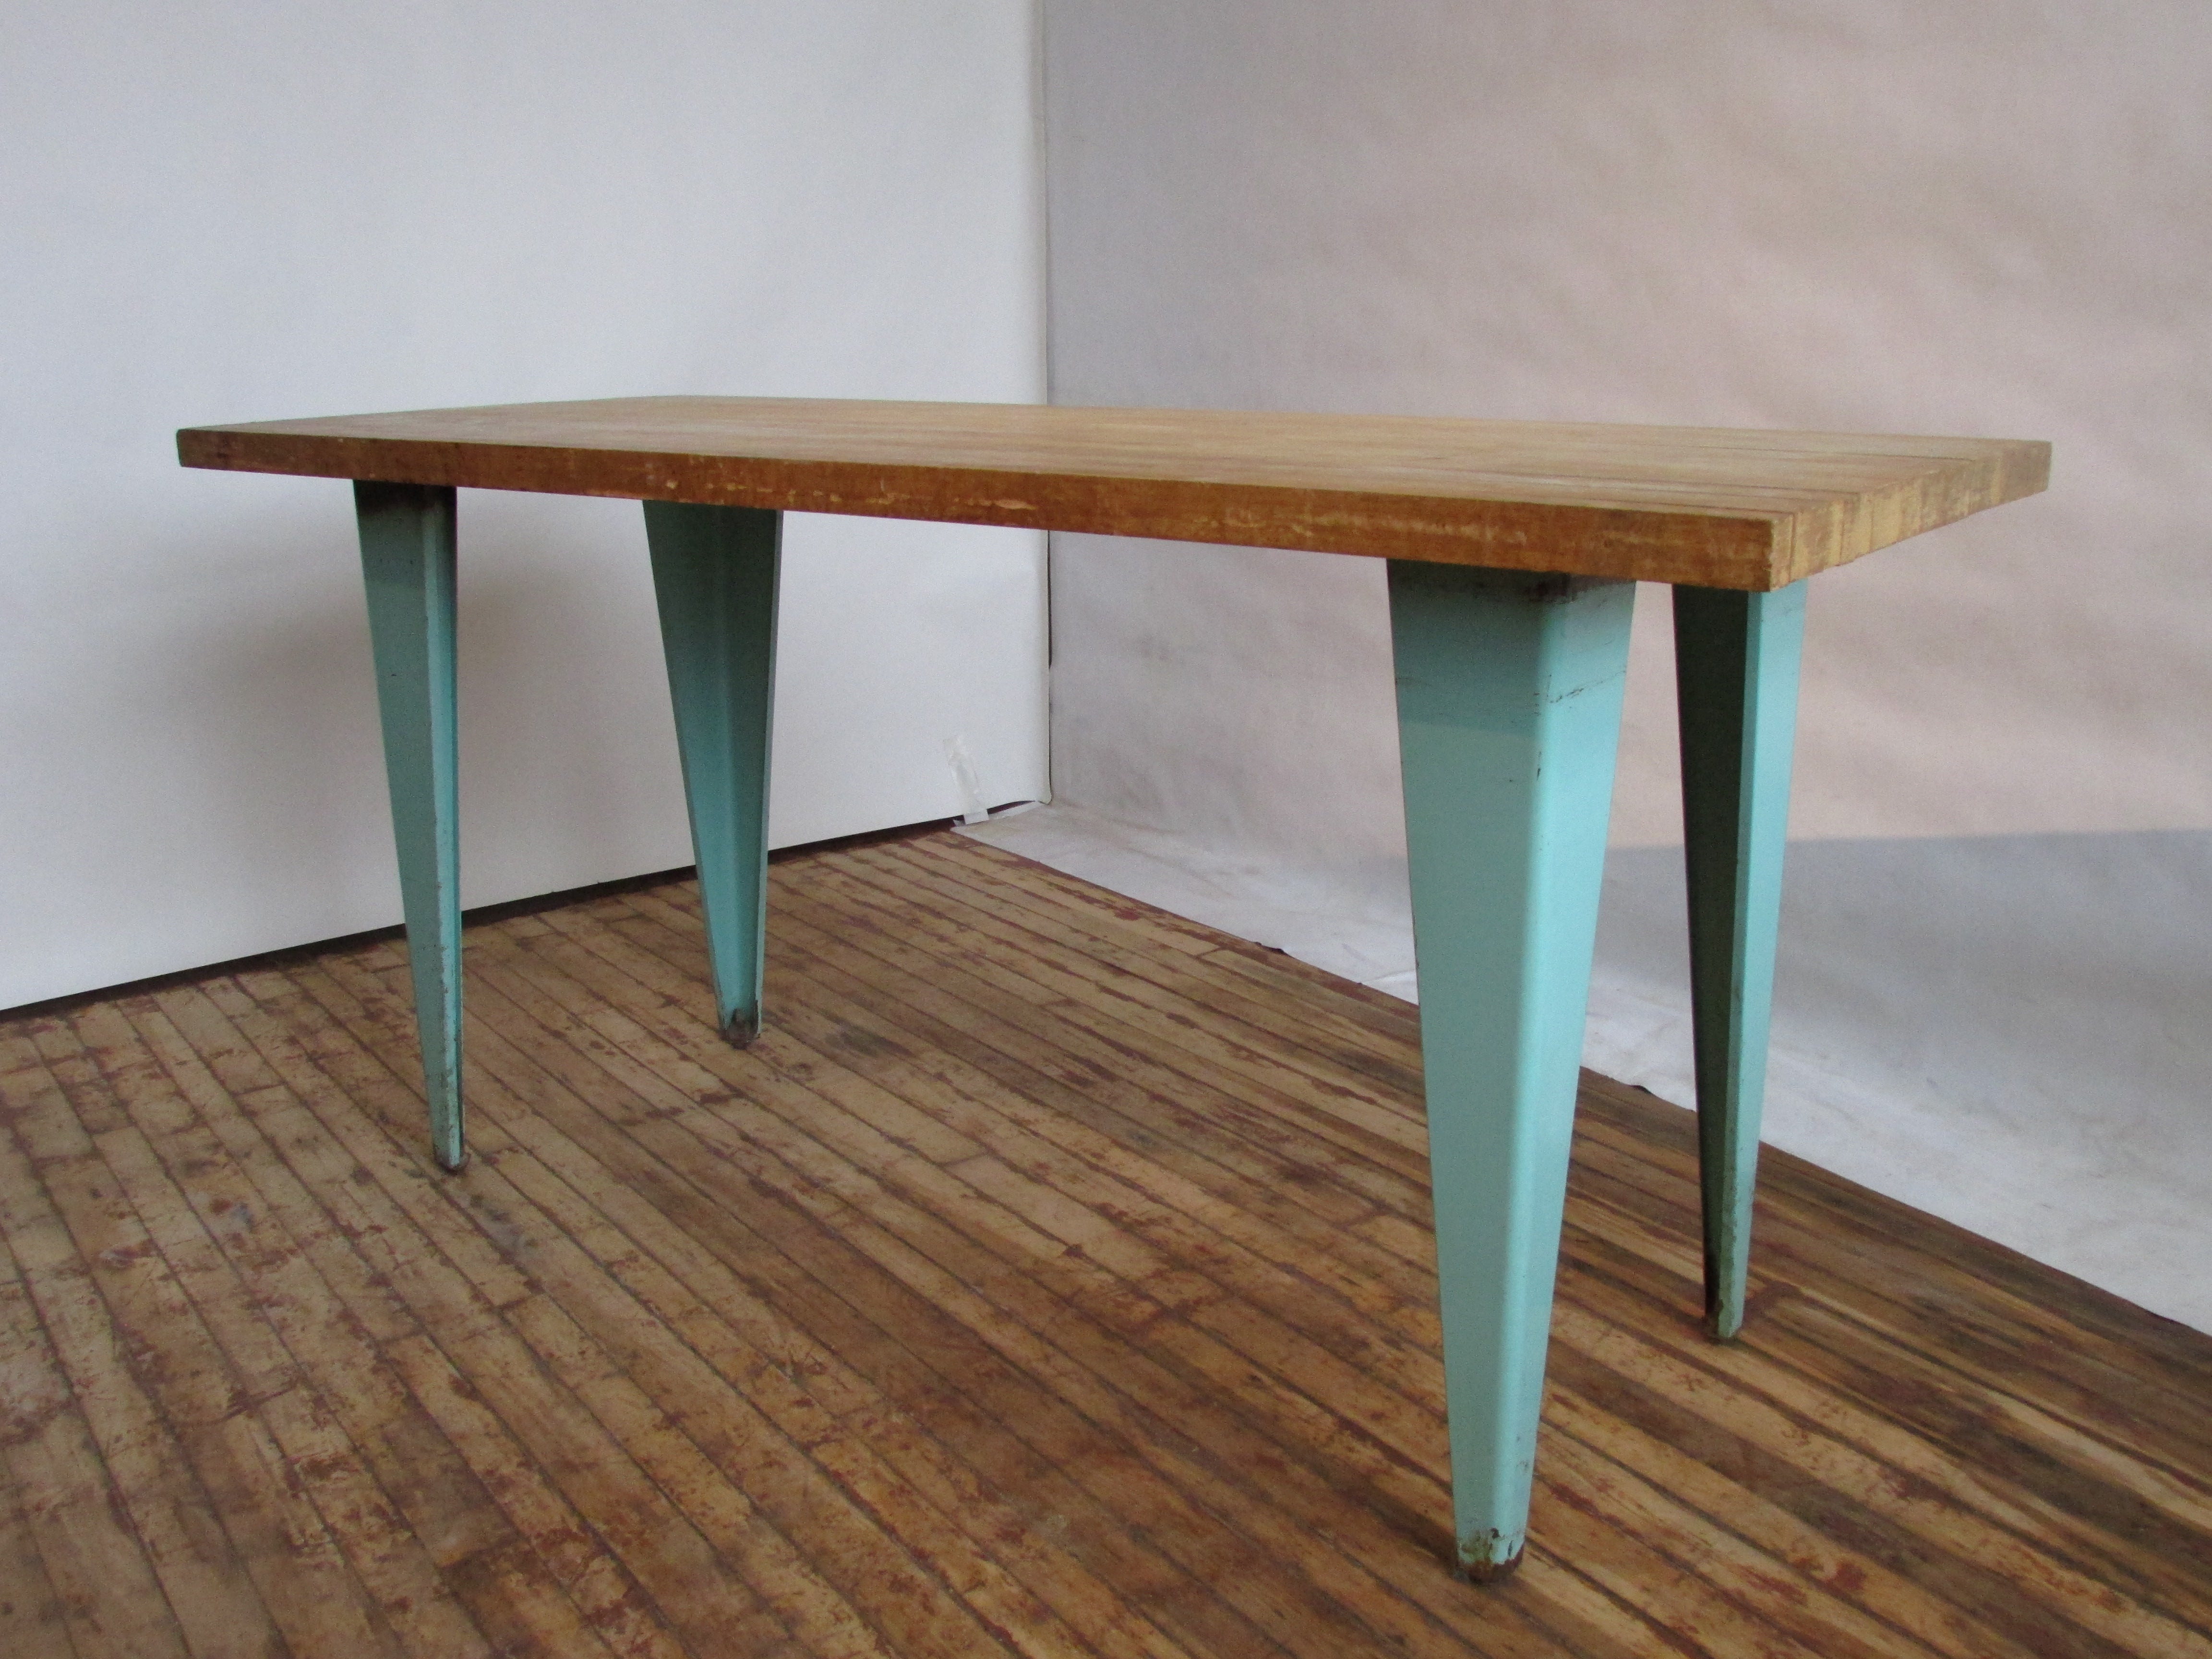 Jean Prouve Style Industrial Table